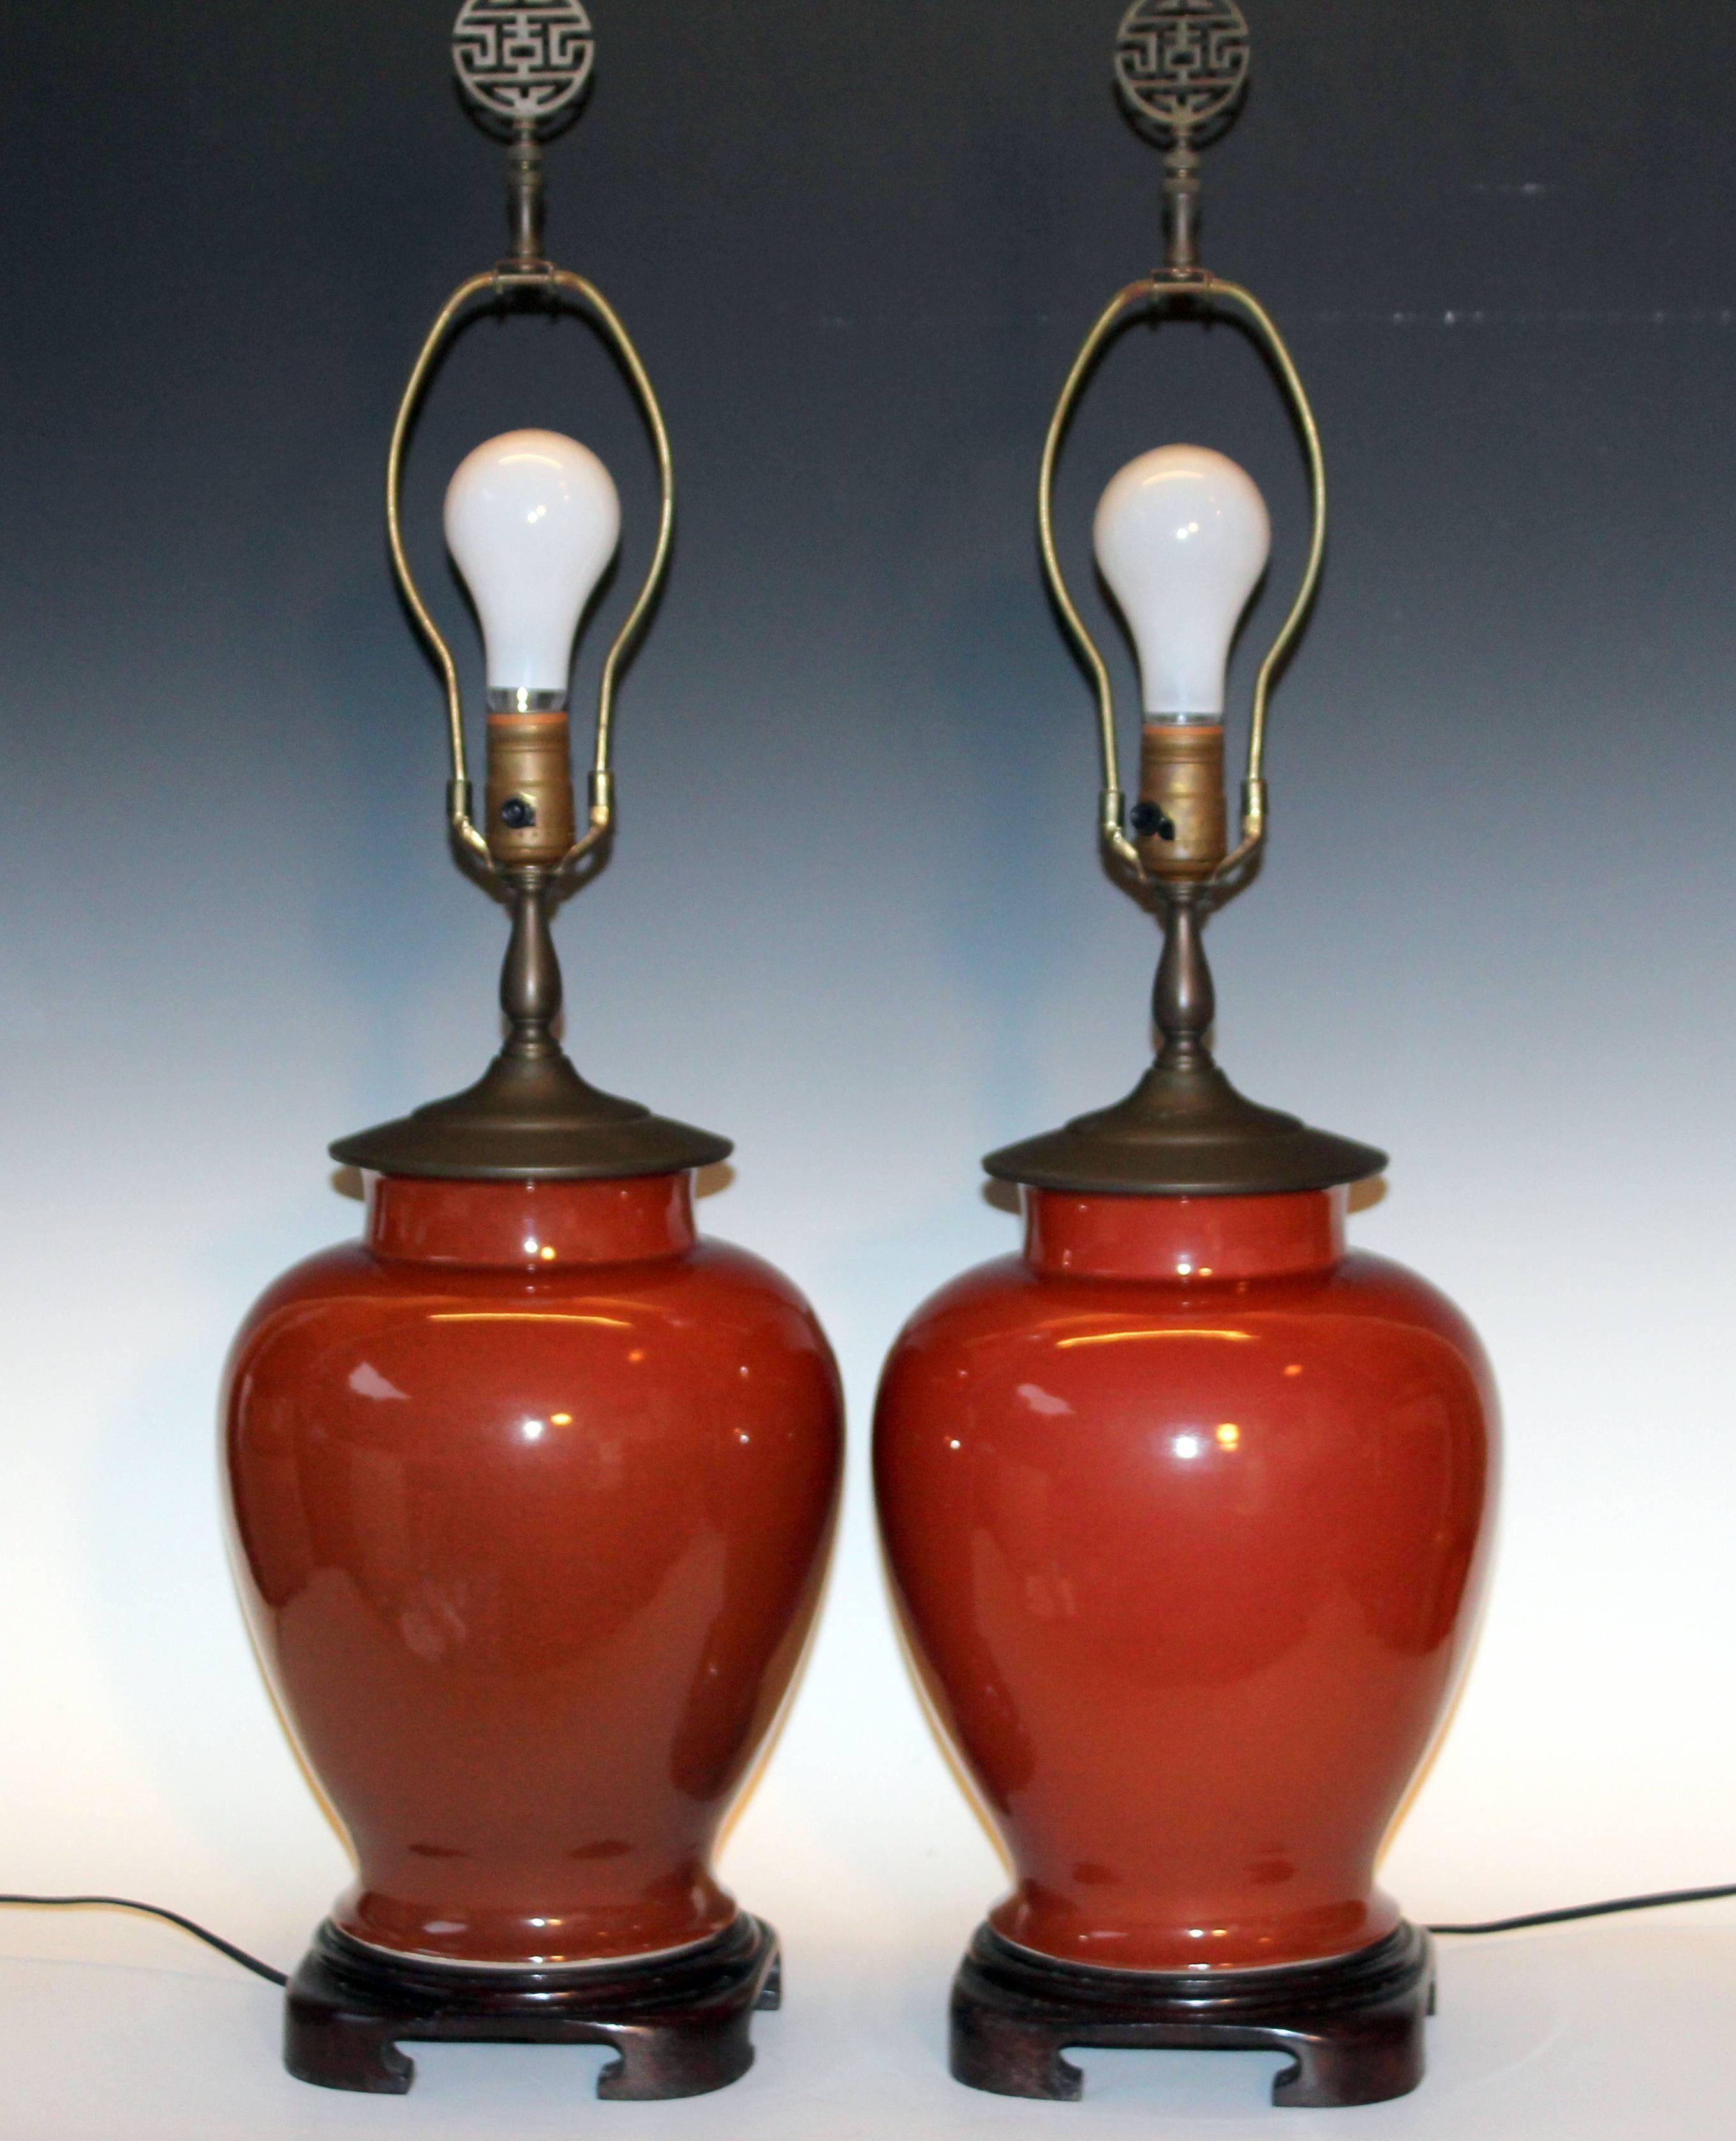 Pair of vintage Chinese porcelain lamps in iron rust glaze and good quality brass hardware with mellowed patina, circa 1970s. Chinese character brass finials. 32